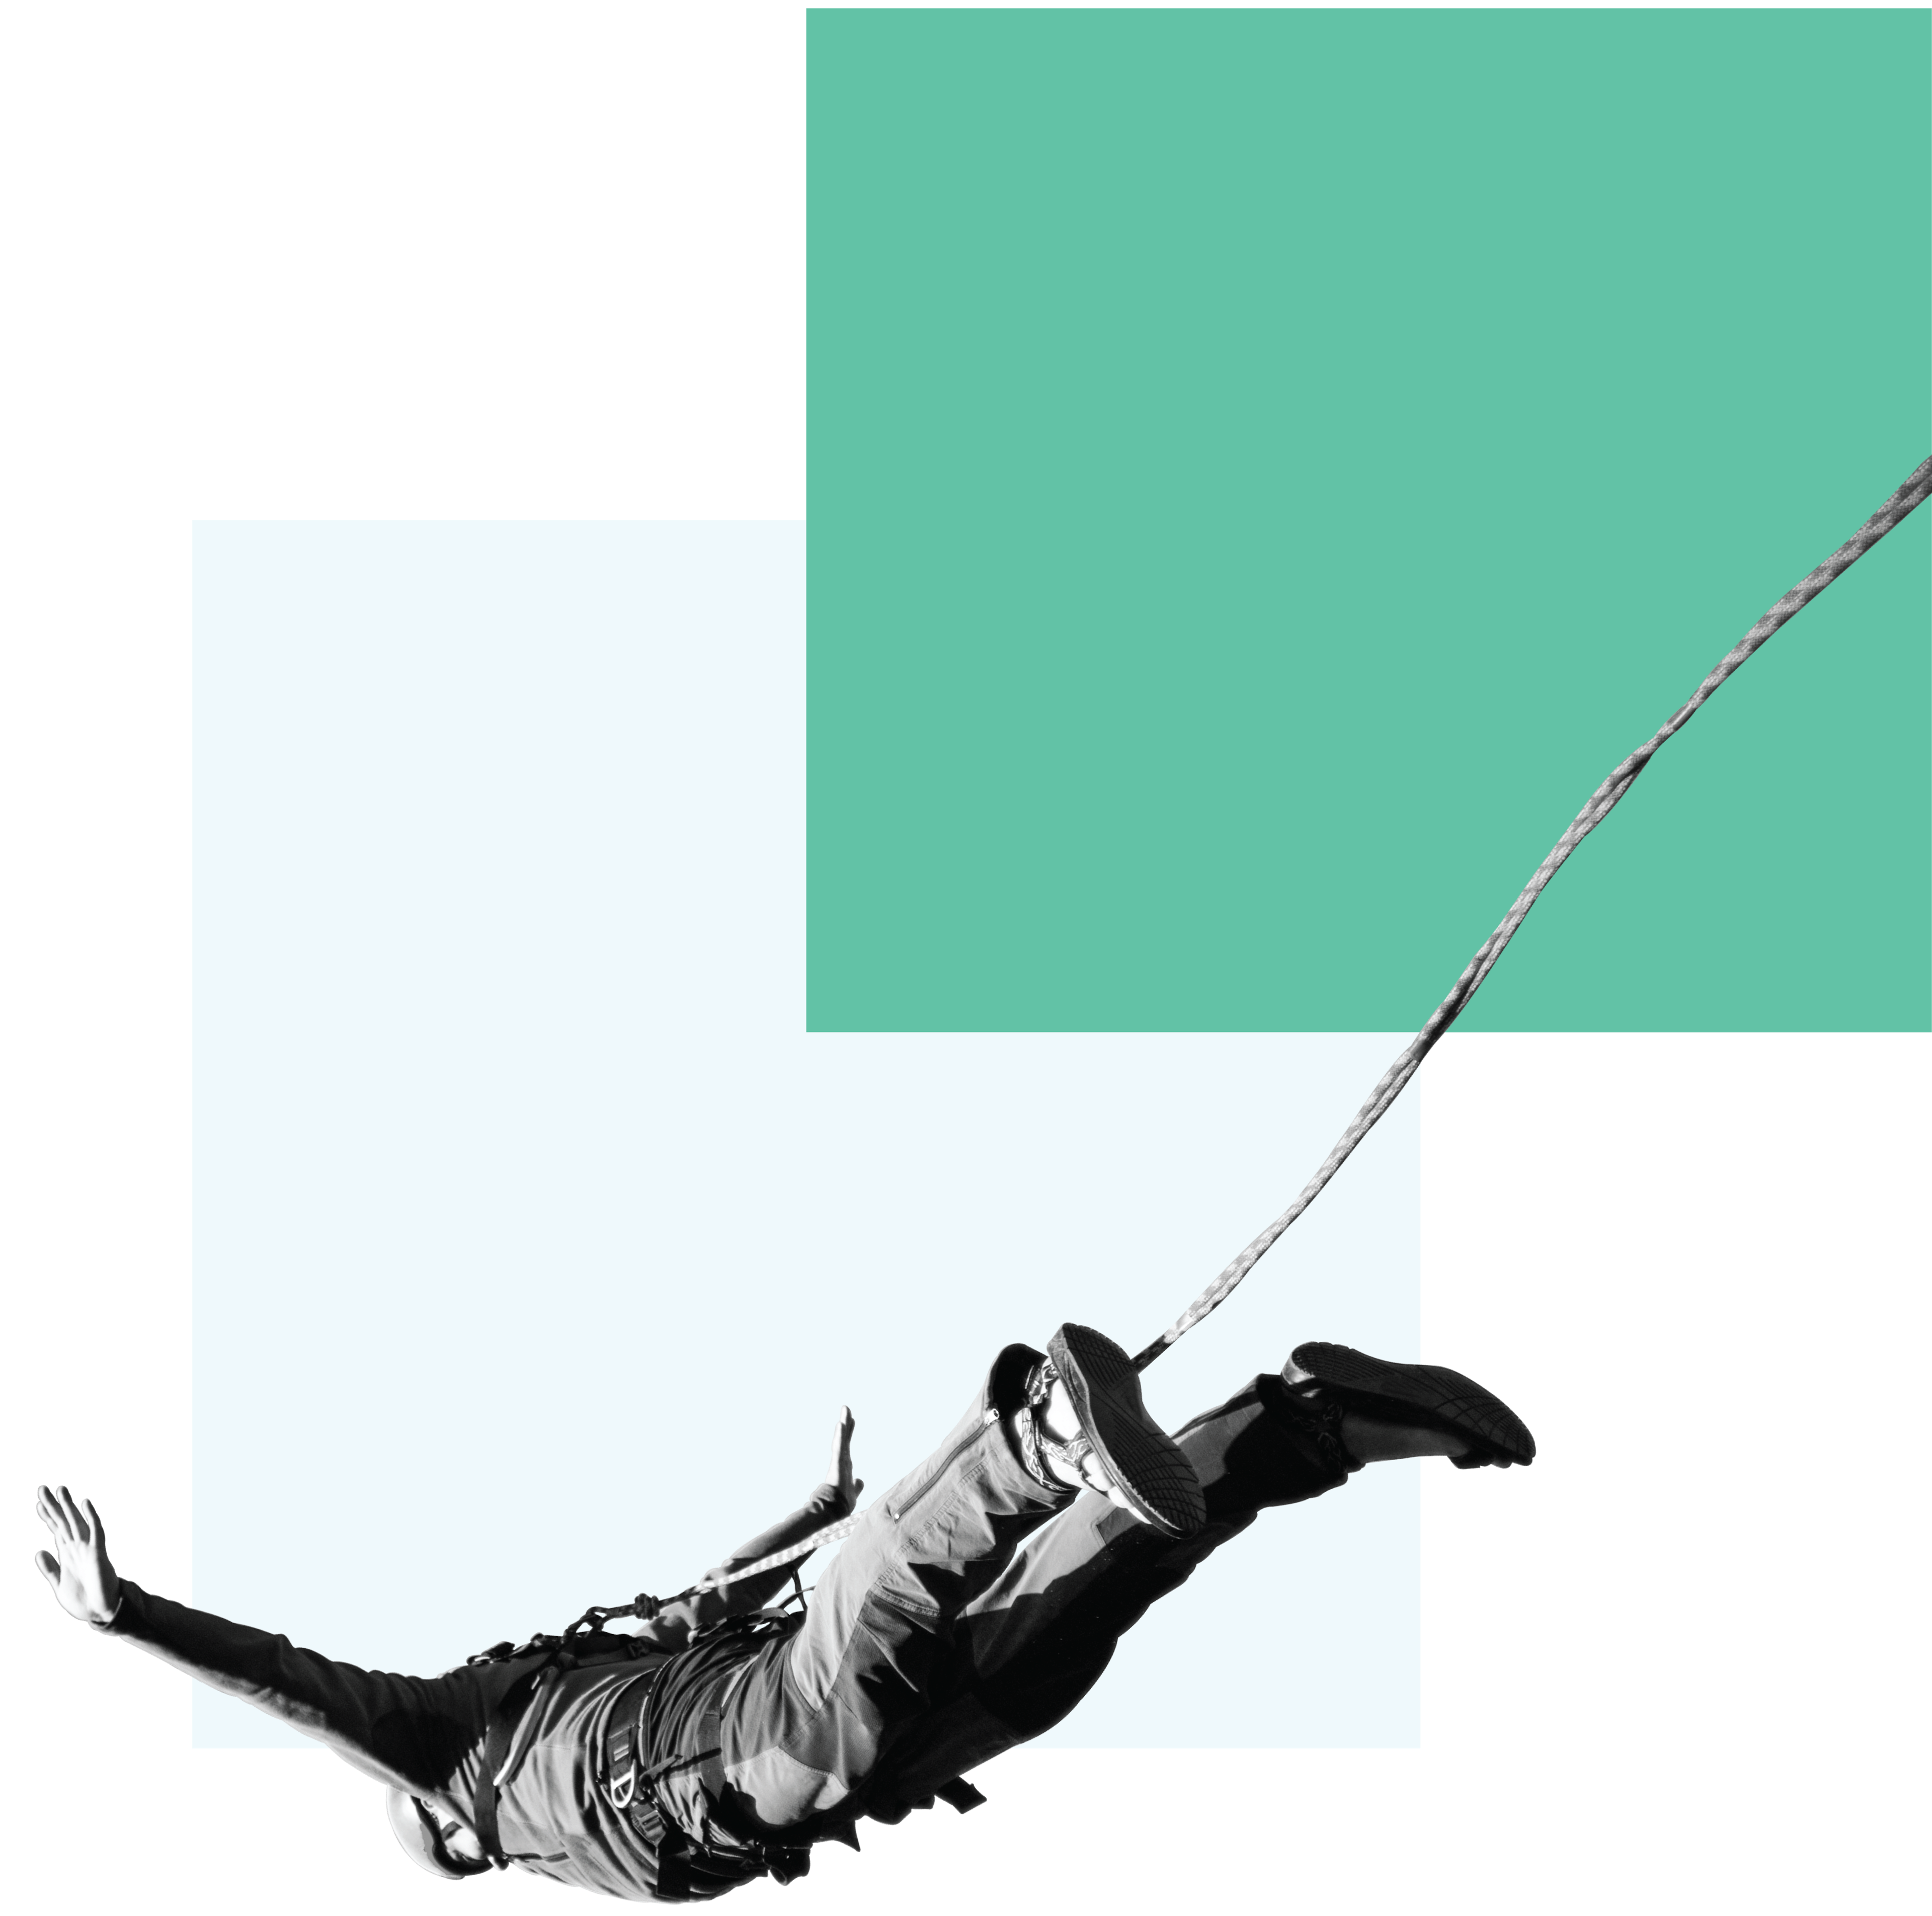 Illustration of bungee jumper in the air against a green background